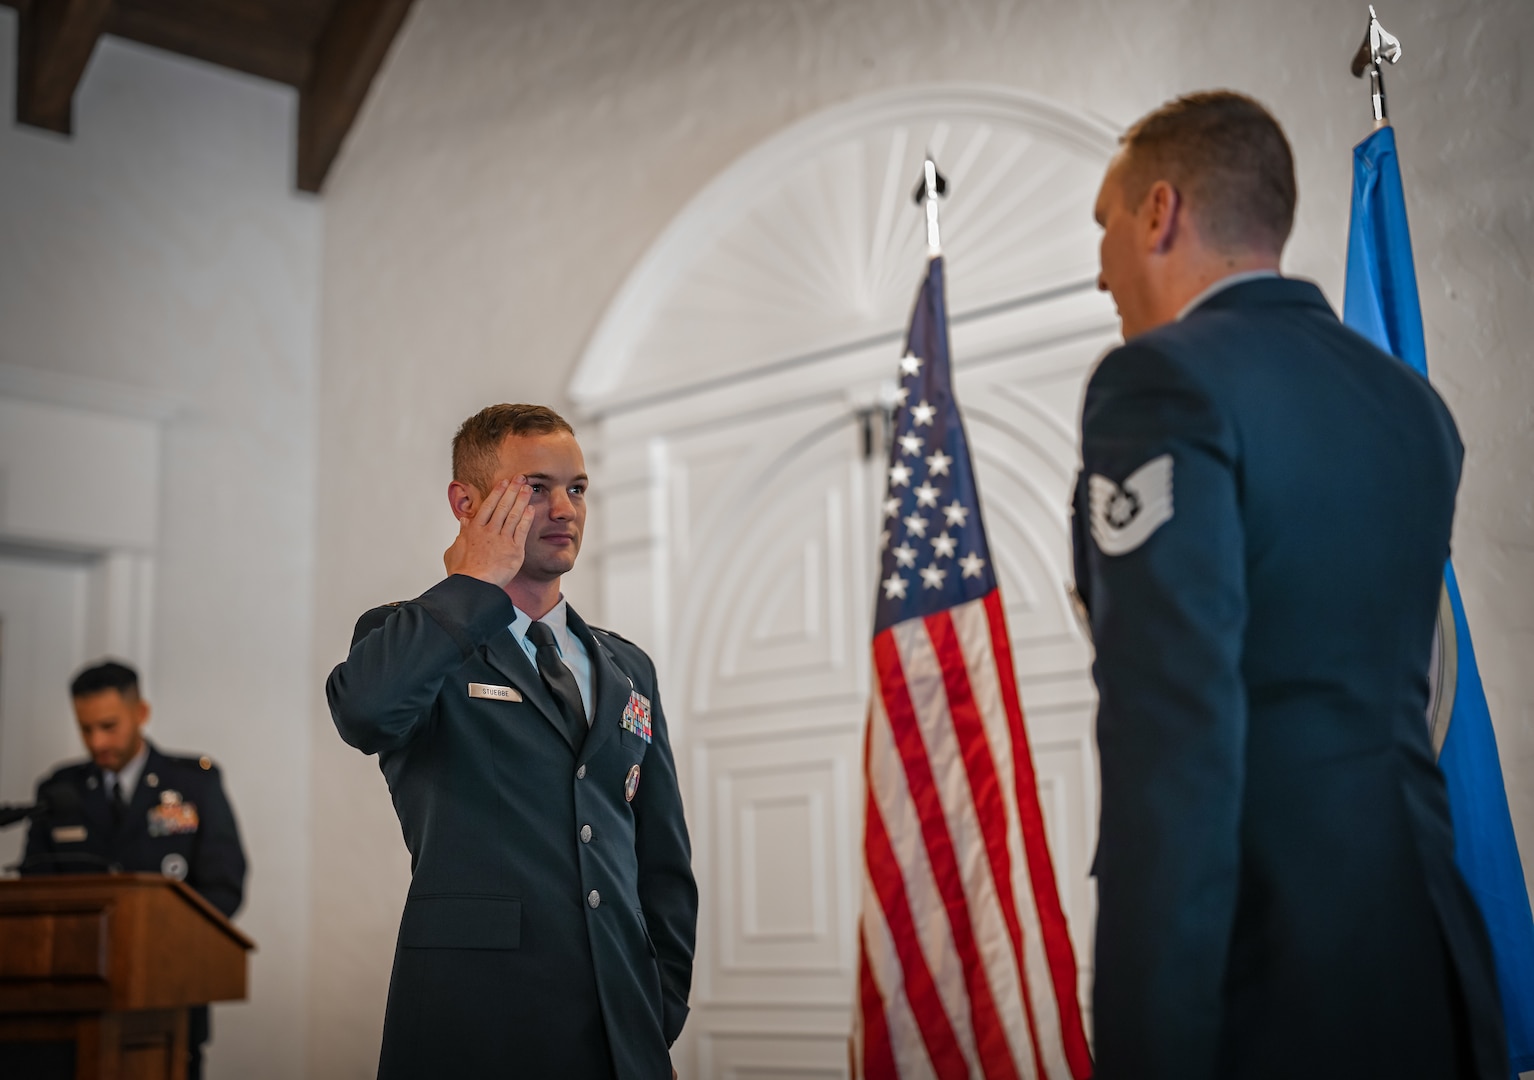 An Air Force officer in uniform salutes another Airman.